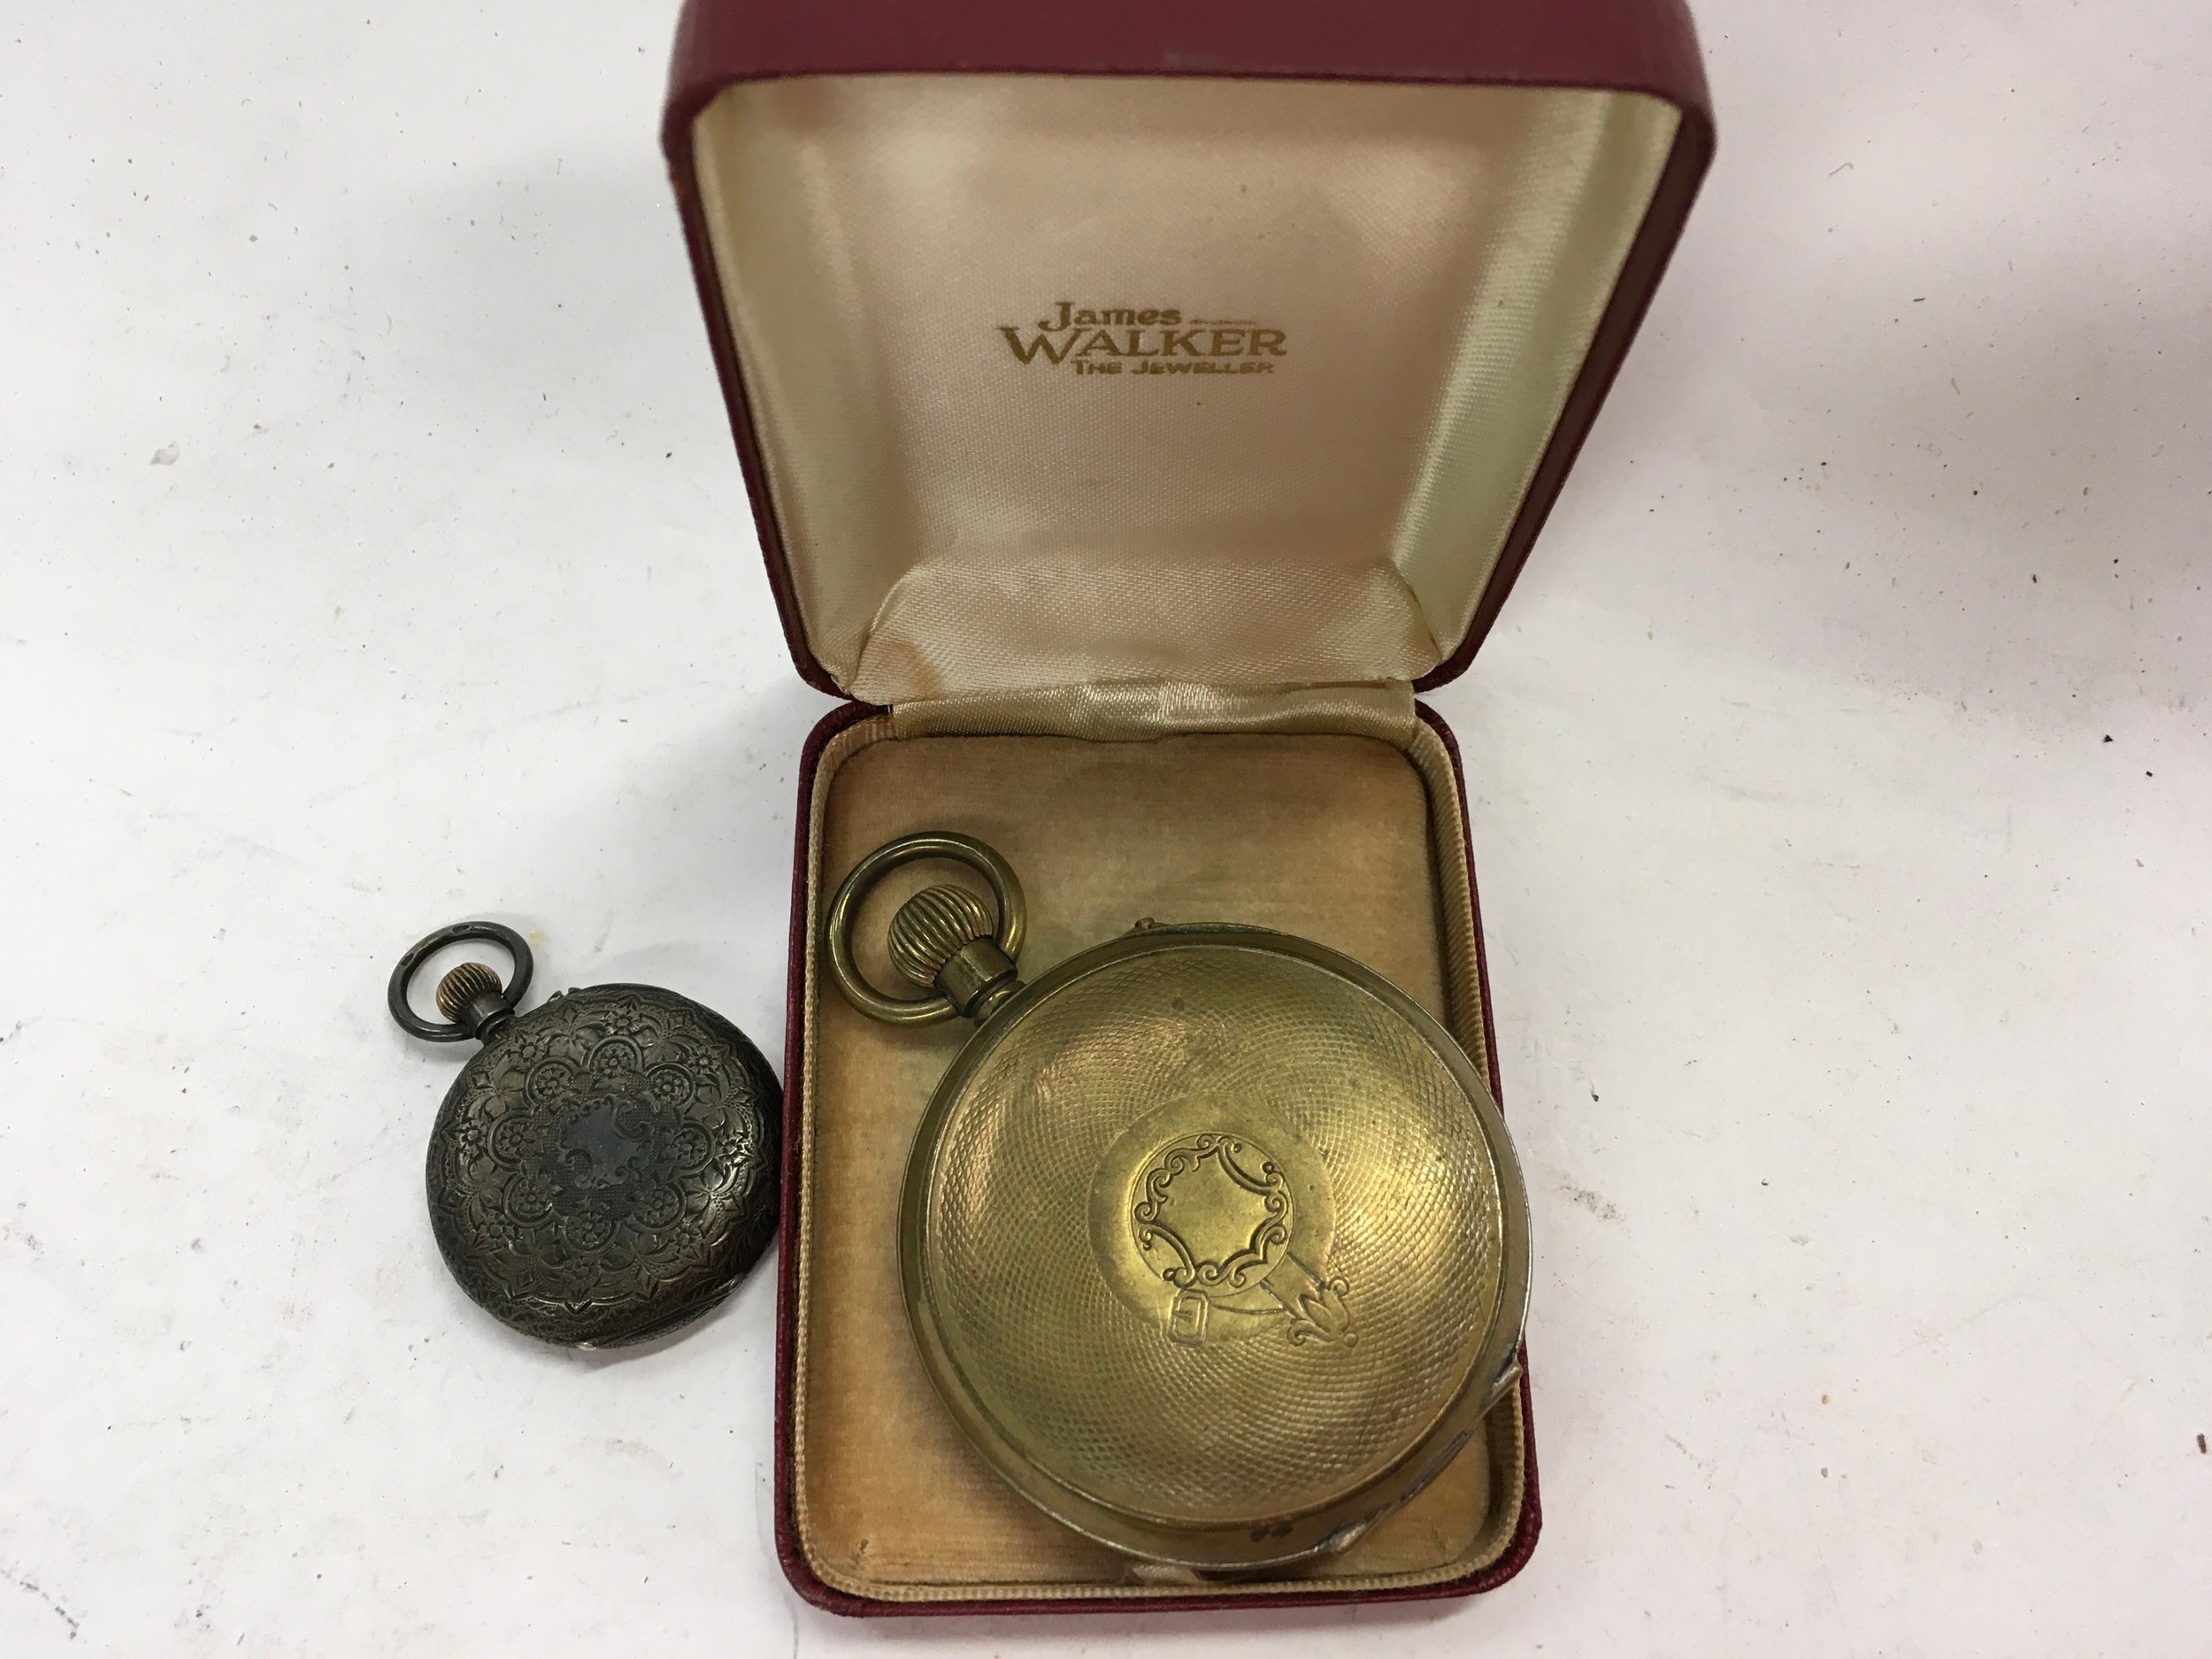 Superior Railway Timekeeper pocket watch together another silver pocket watch - Image 2 of 2